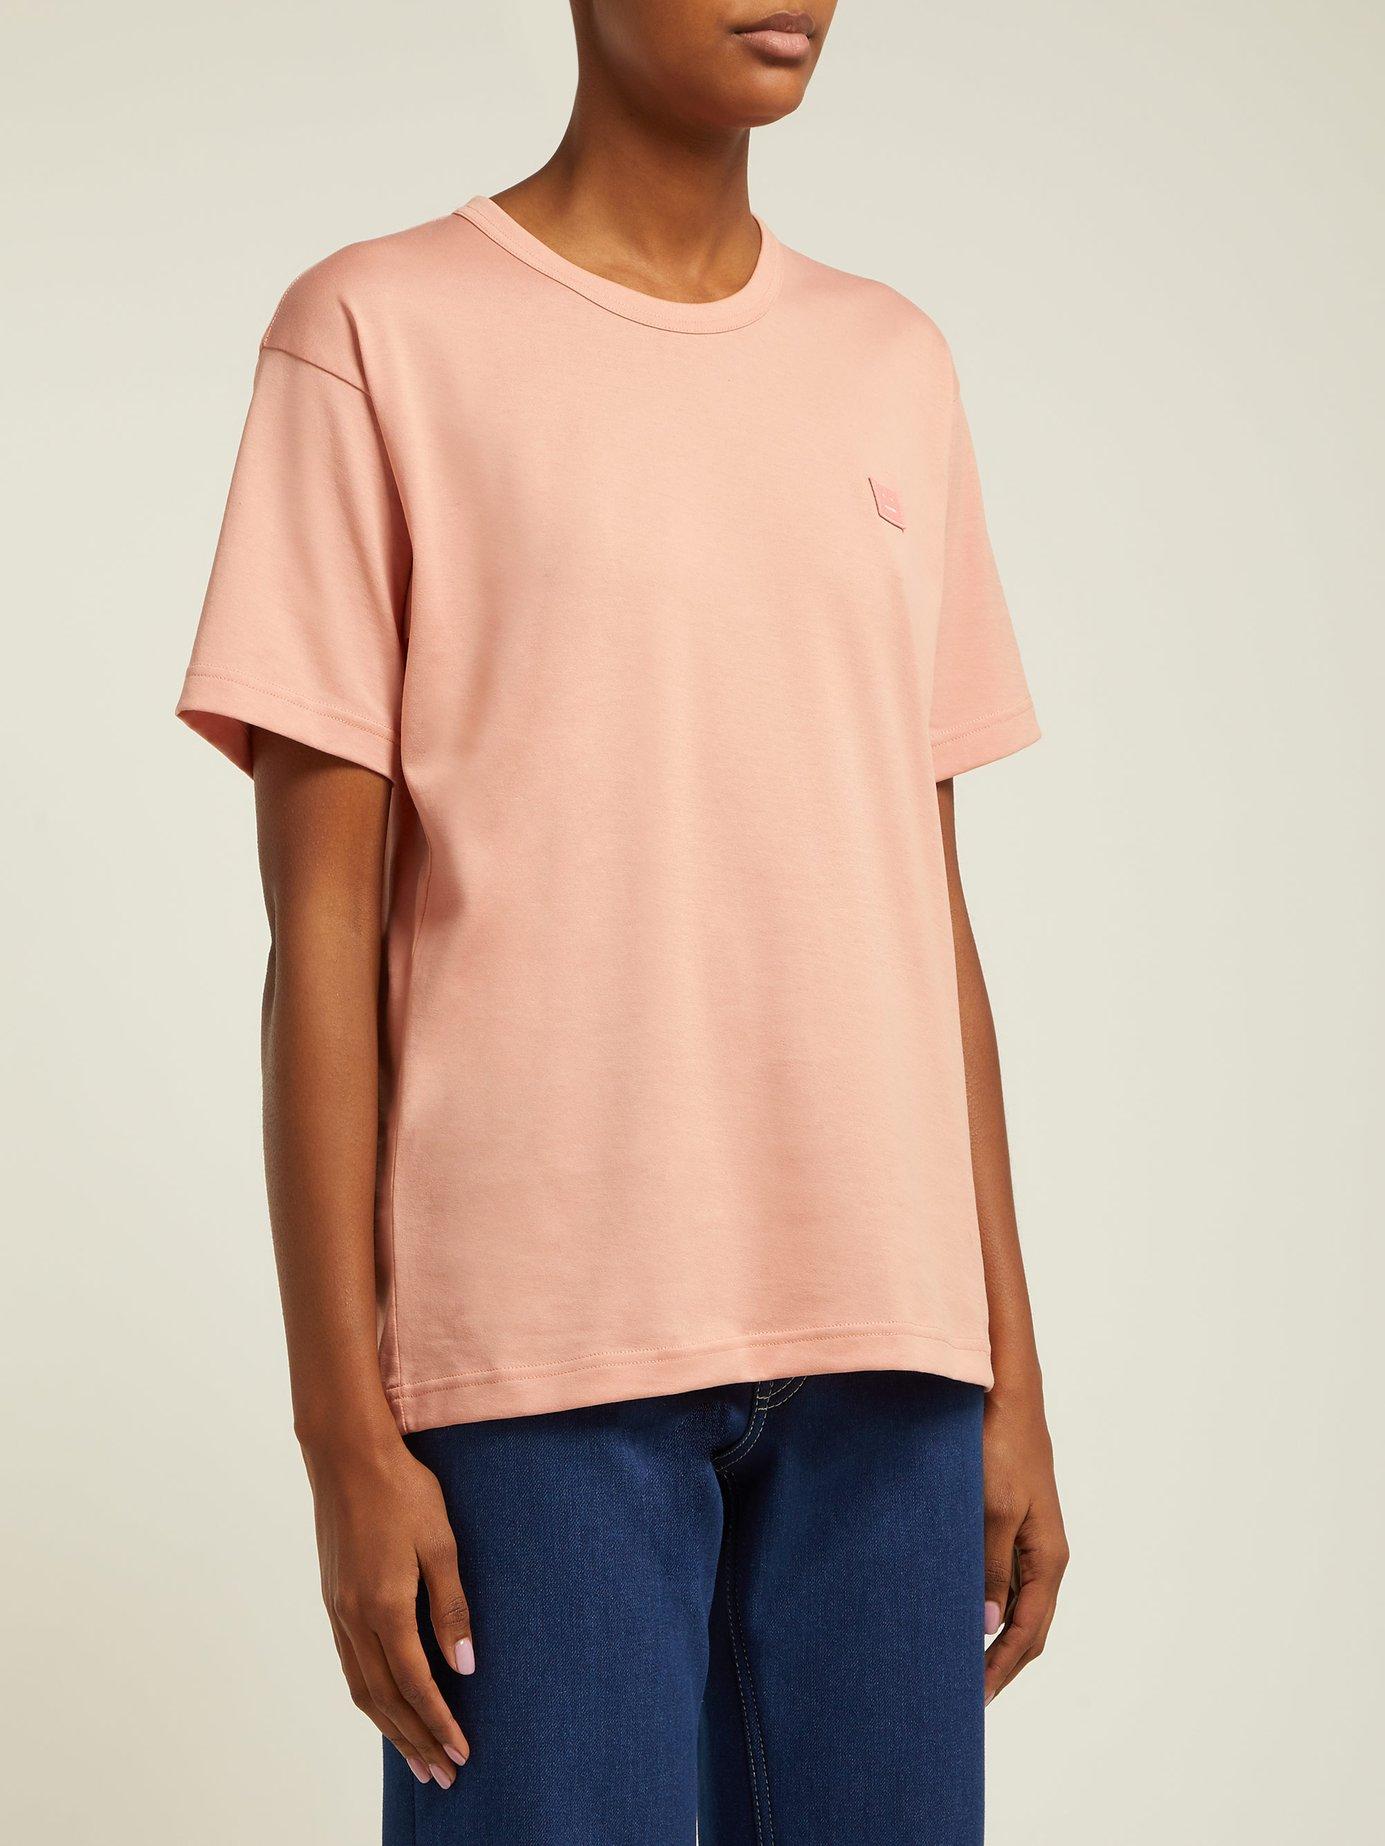 Acne Studios Face Cotton Jersey T Shirt in Light Pink (Pink) - Lyst